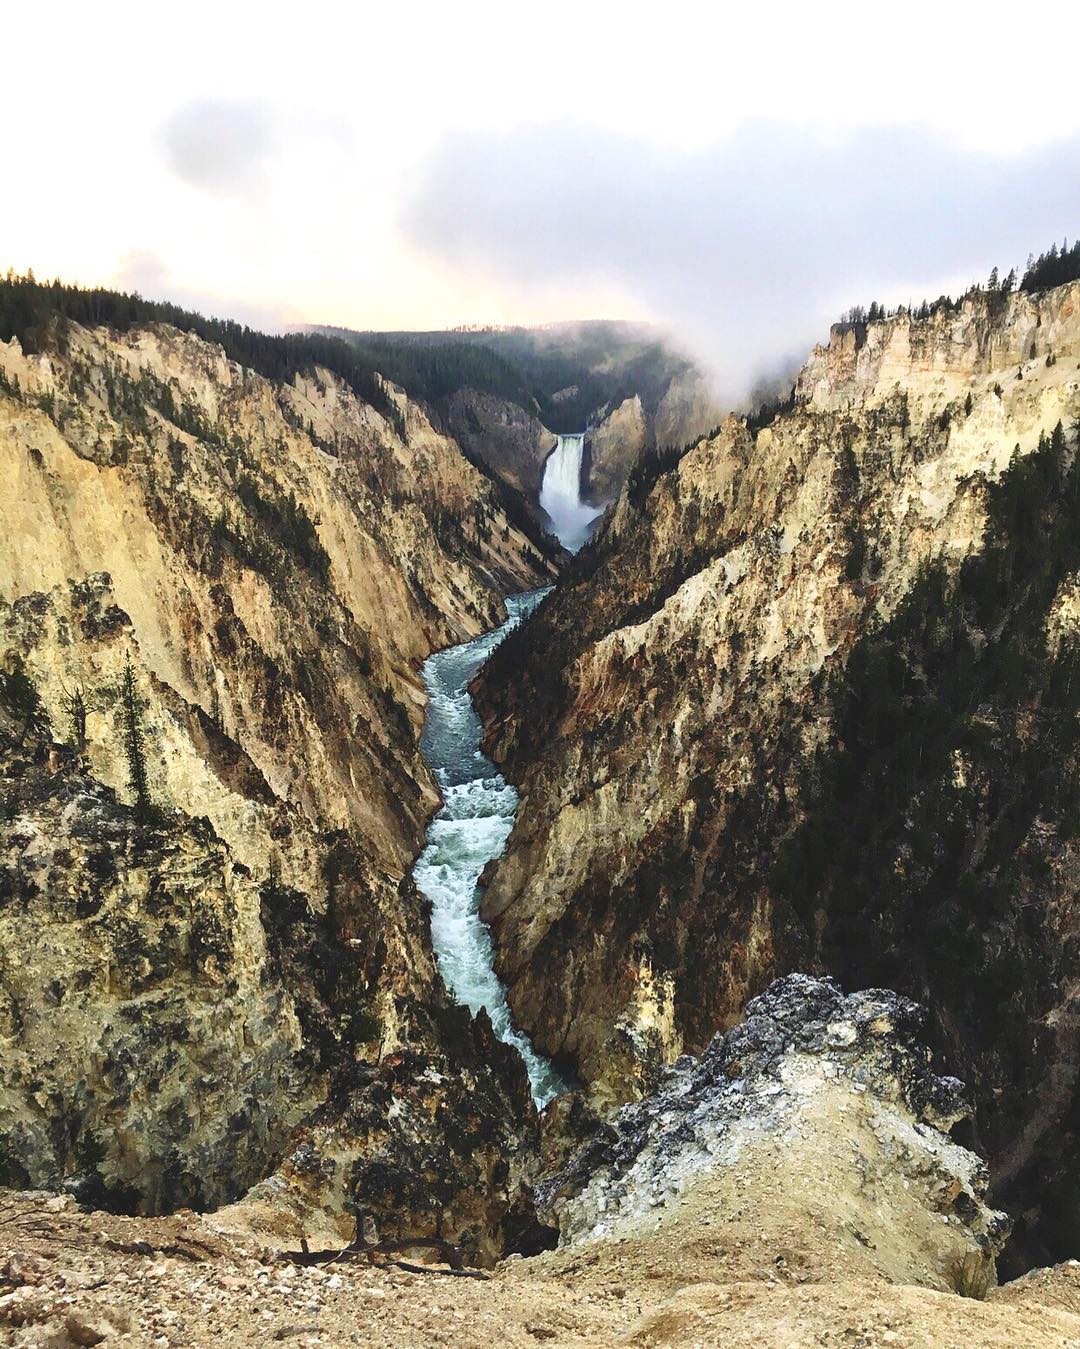 Top 7 National Parks in the USA - Yellowstone National Park